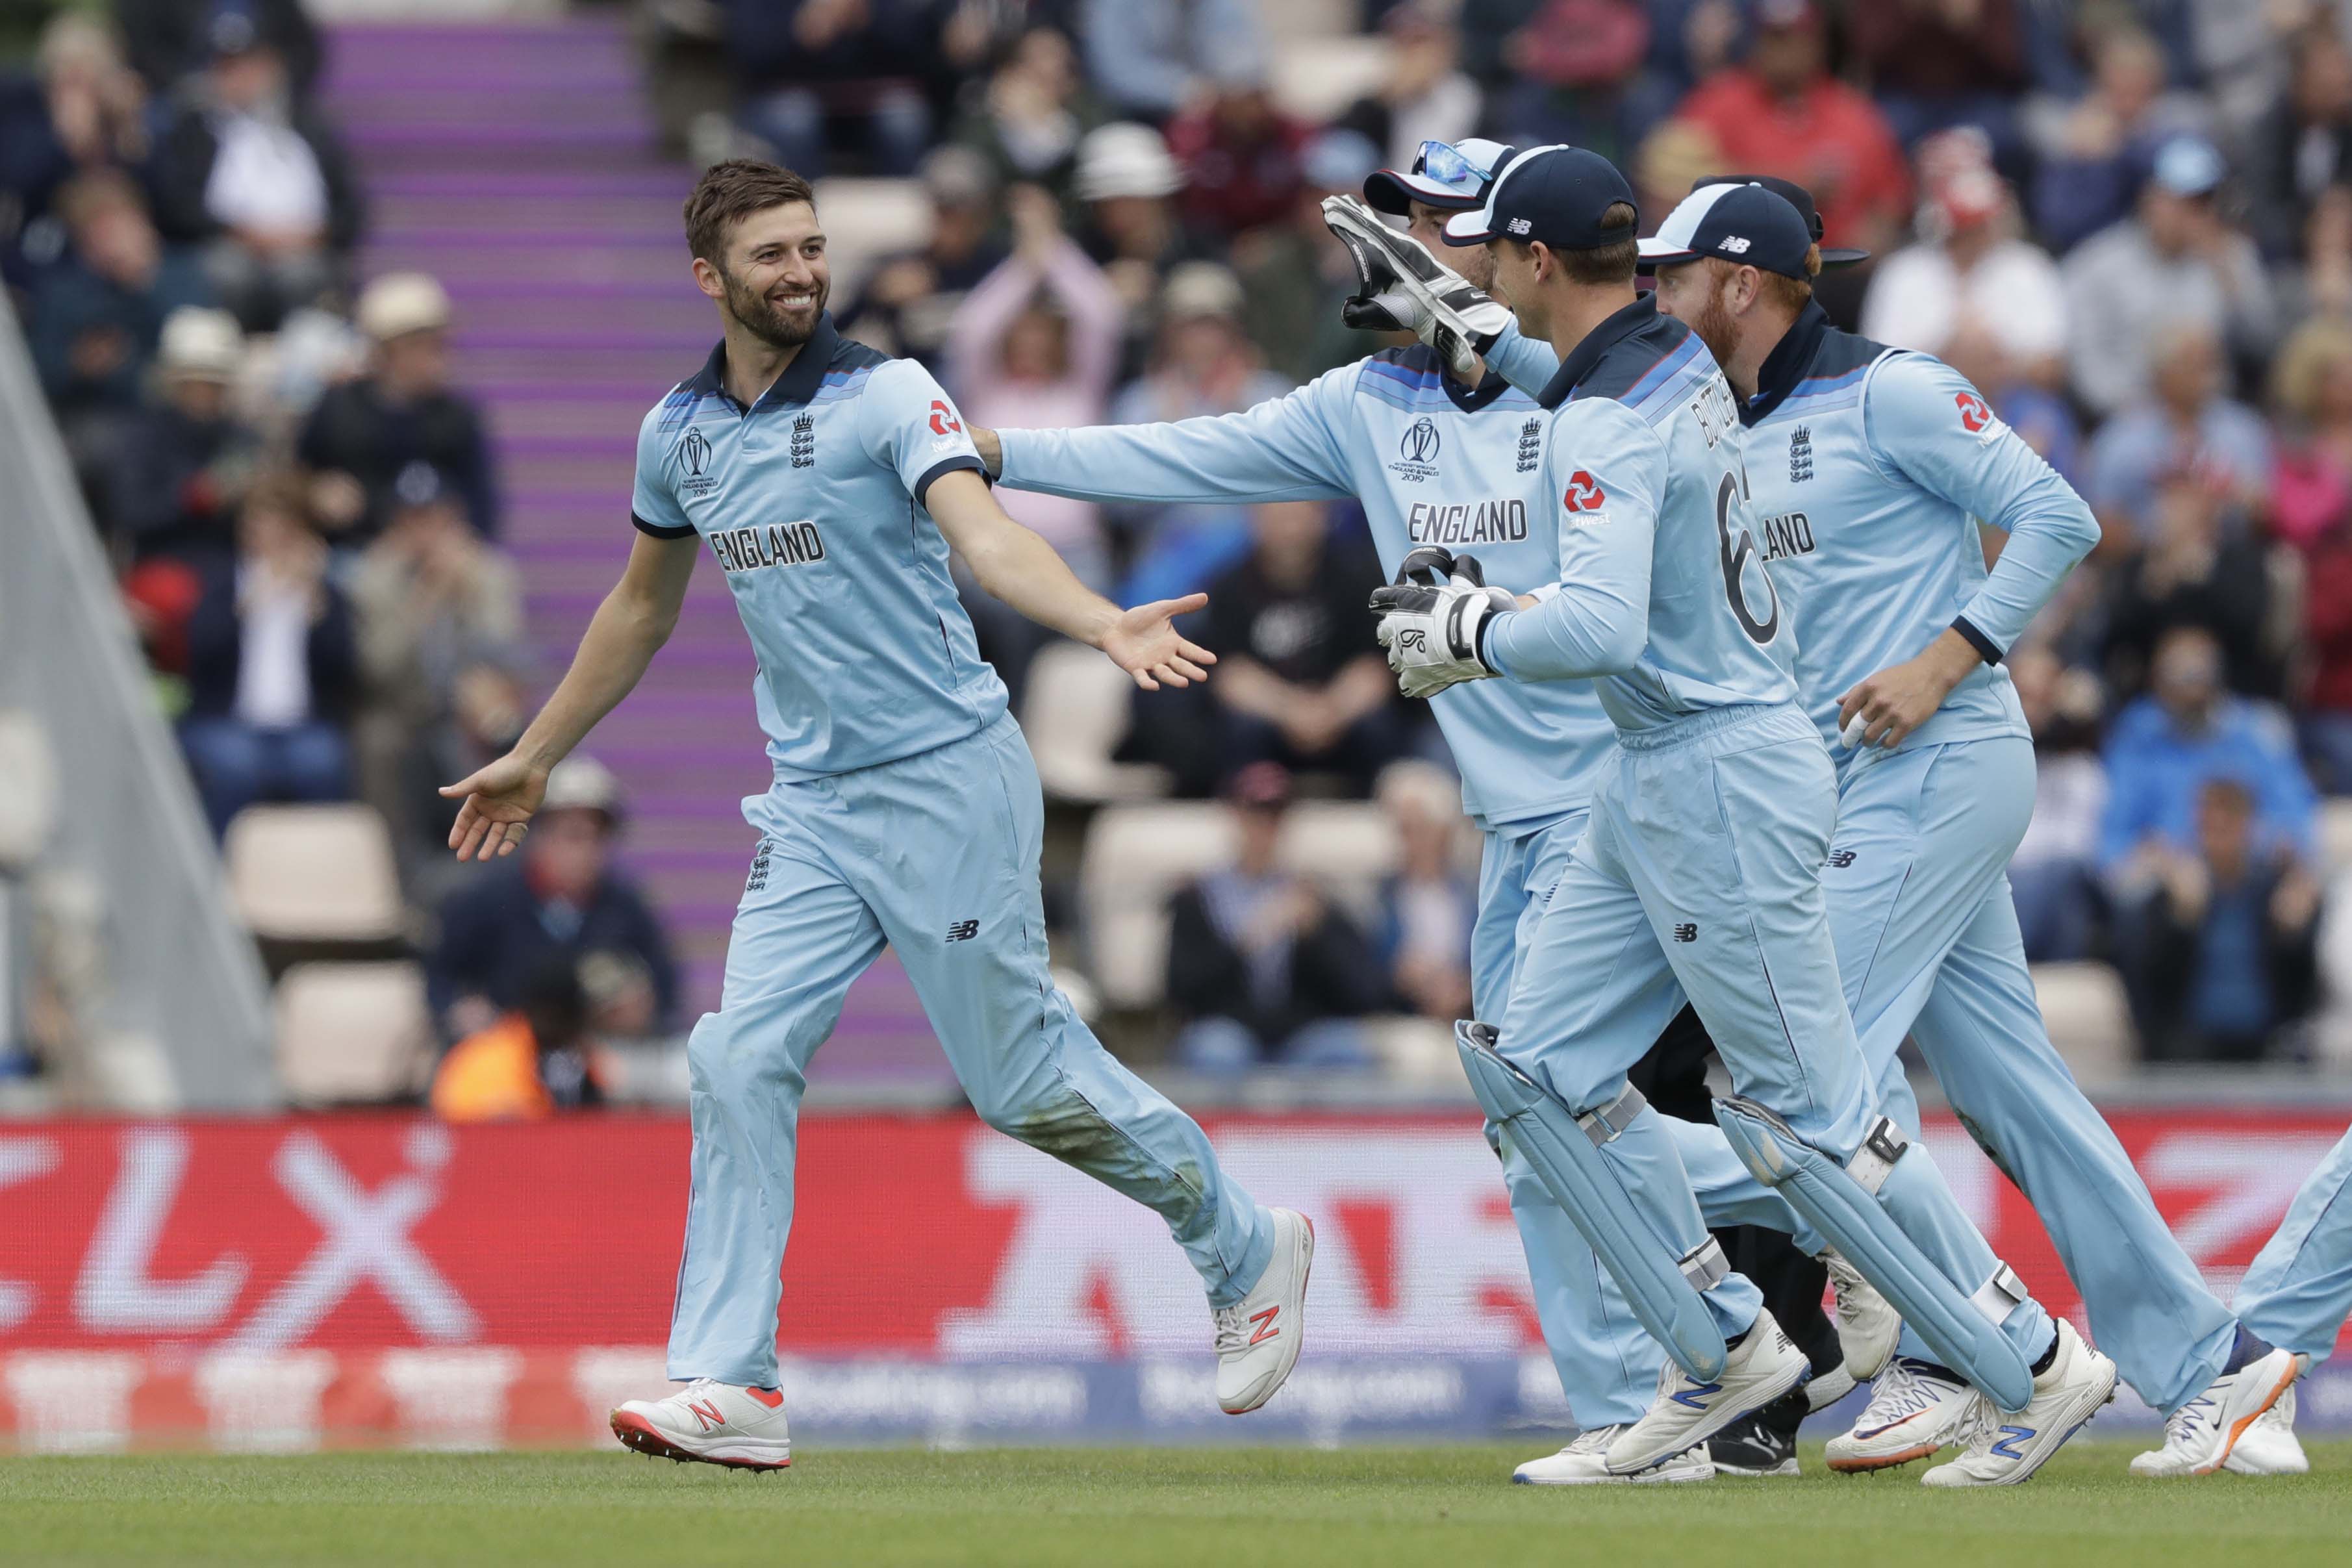 Eng-WI, Cricket World Cup match, The Federal, English news website